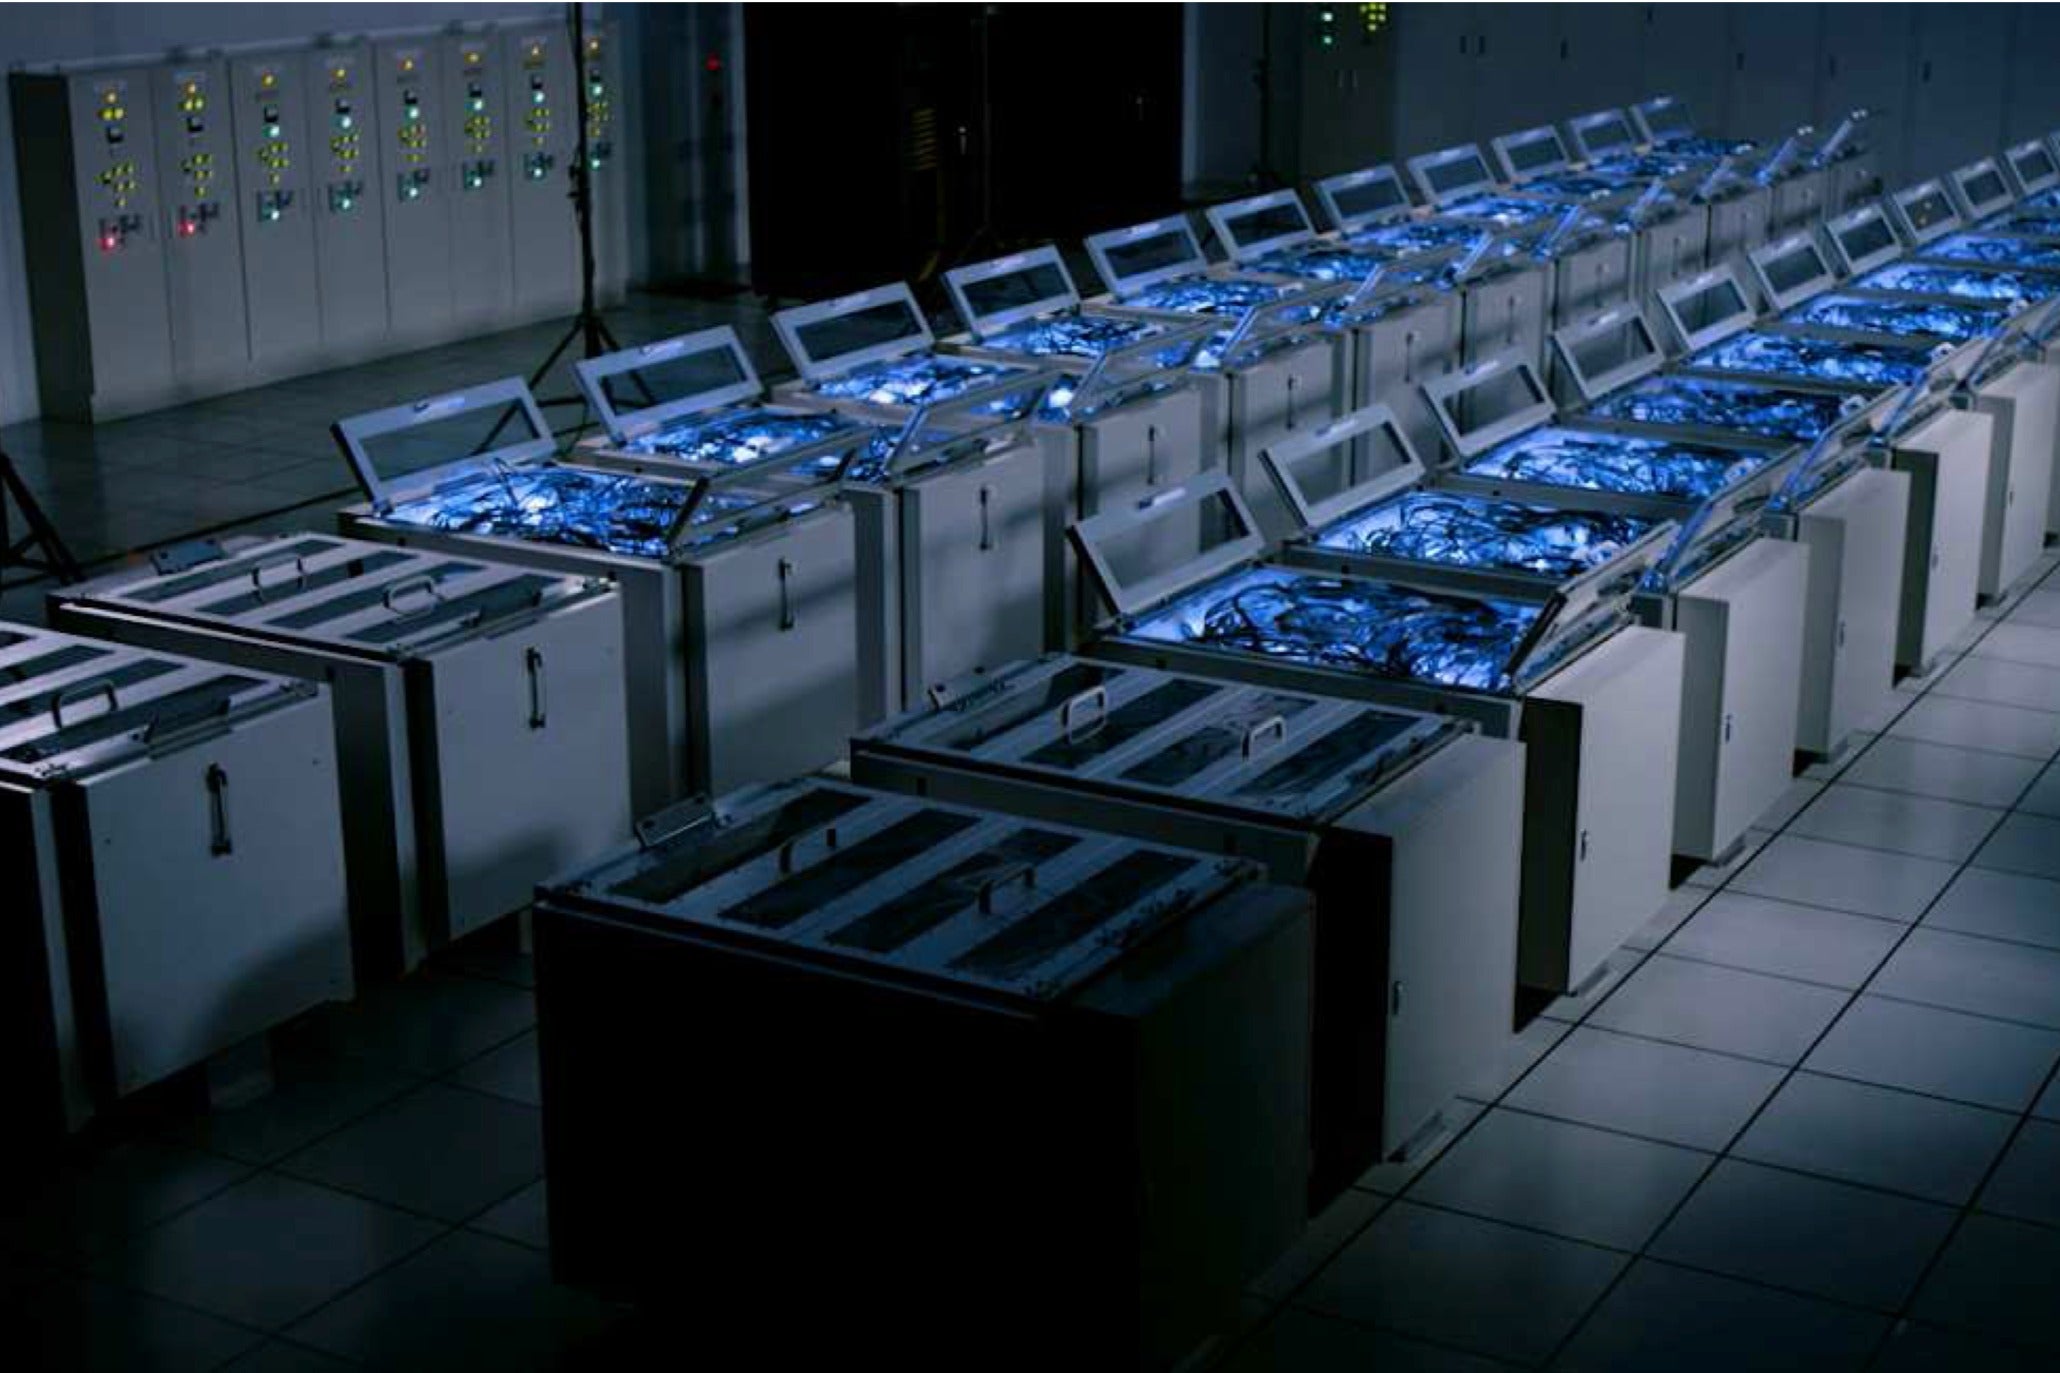 10 of the world's fastest supercomputers | ITworld